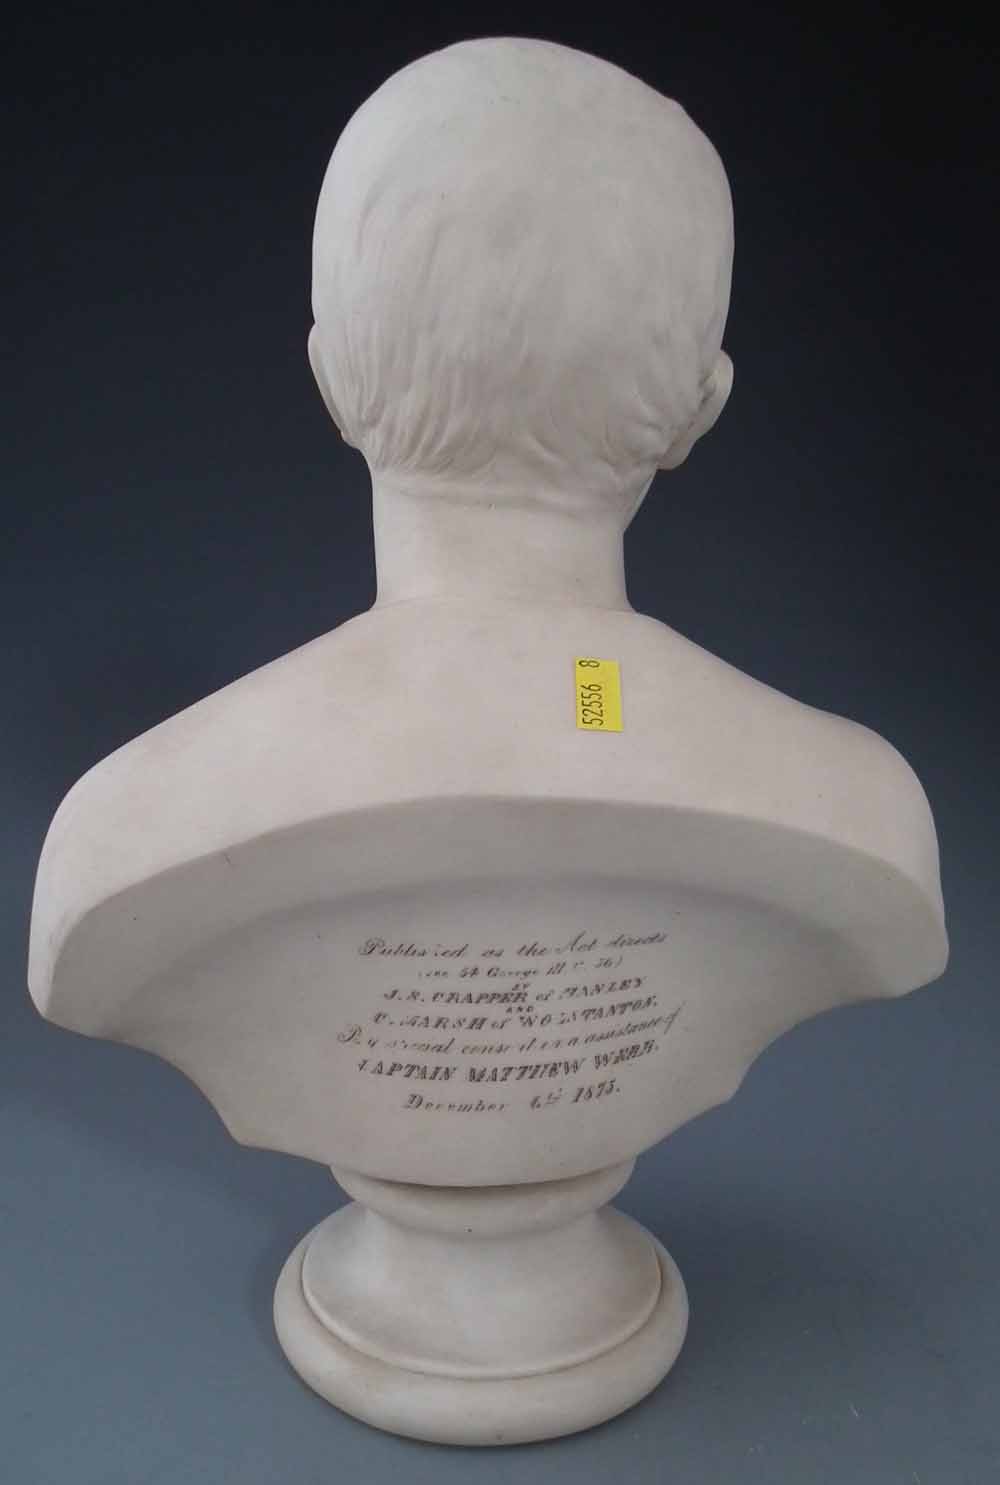 Staffordshire Parian bust of Captain Mathew Webb circa 1875   published by J.S. Crapper and C. - Image 5 of 9